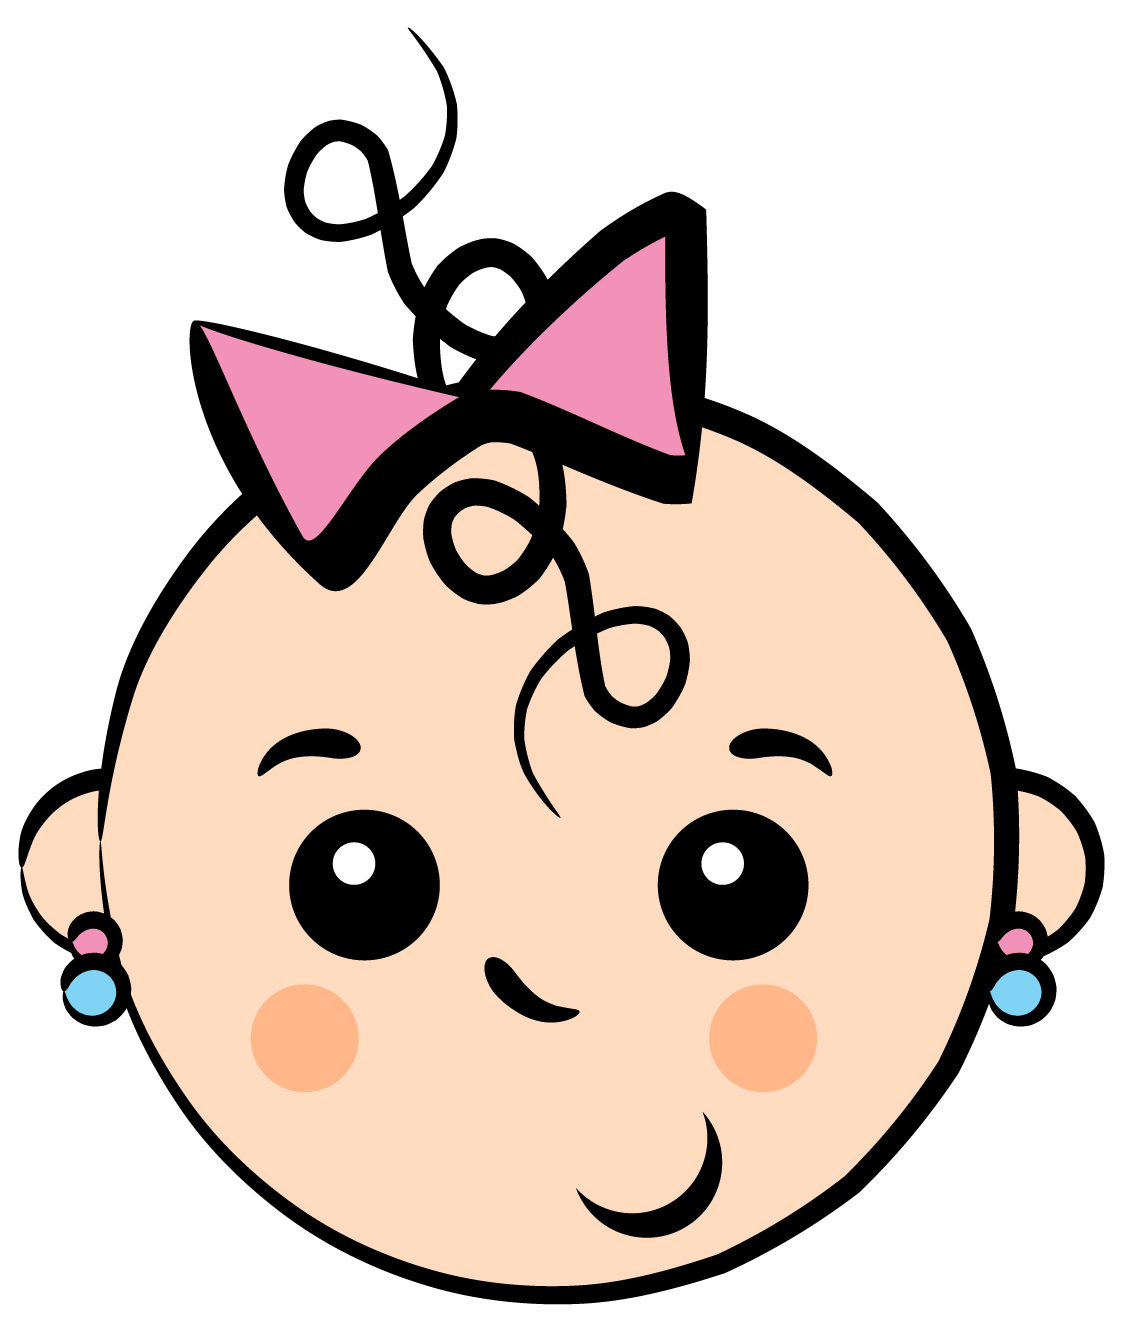 baby shower vector clipart - photo #48